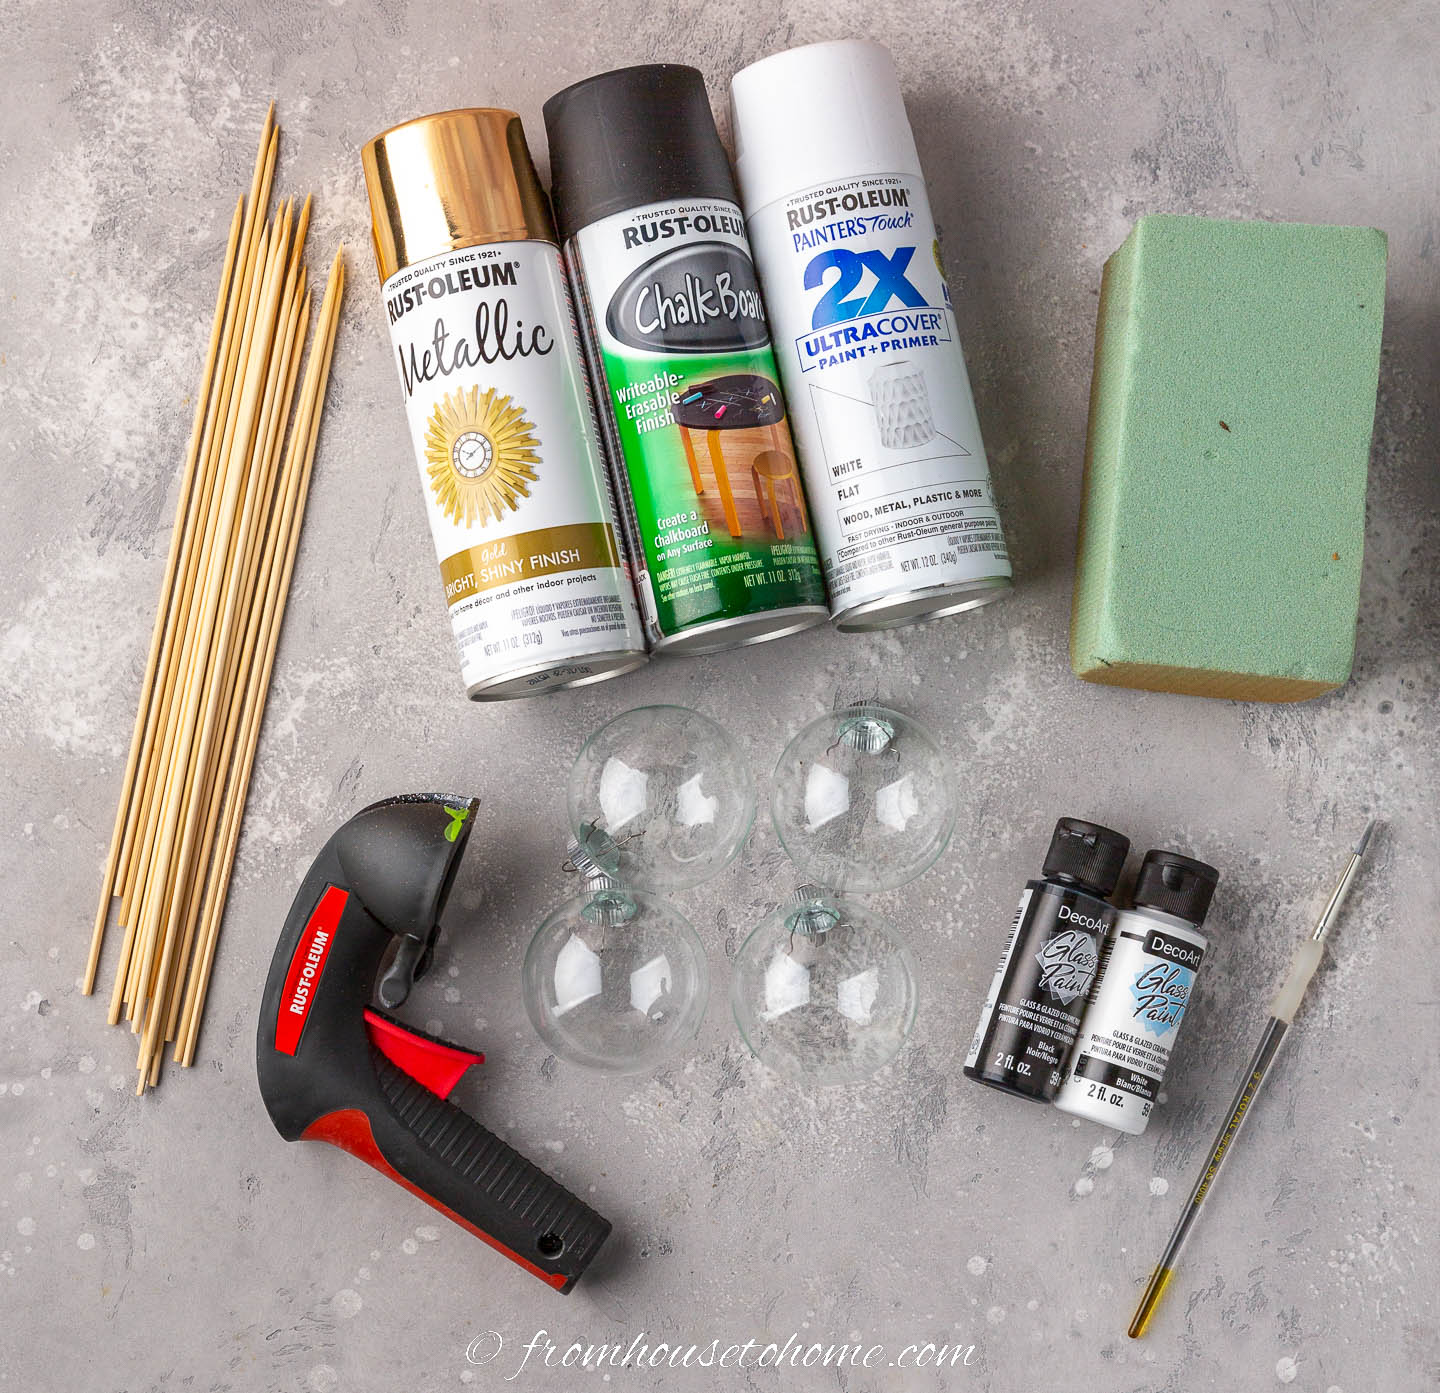 Materials and equipment to make DIY black and white polka dot ornaments - spray paint, floral foam, skewers, paint spray trigger, clear ornaments, glass paint and a small paint brush